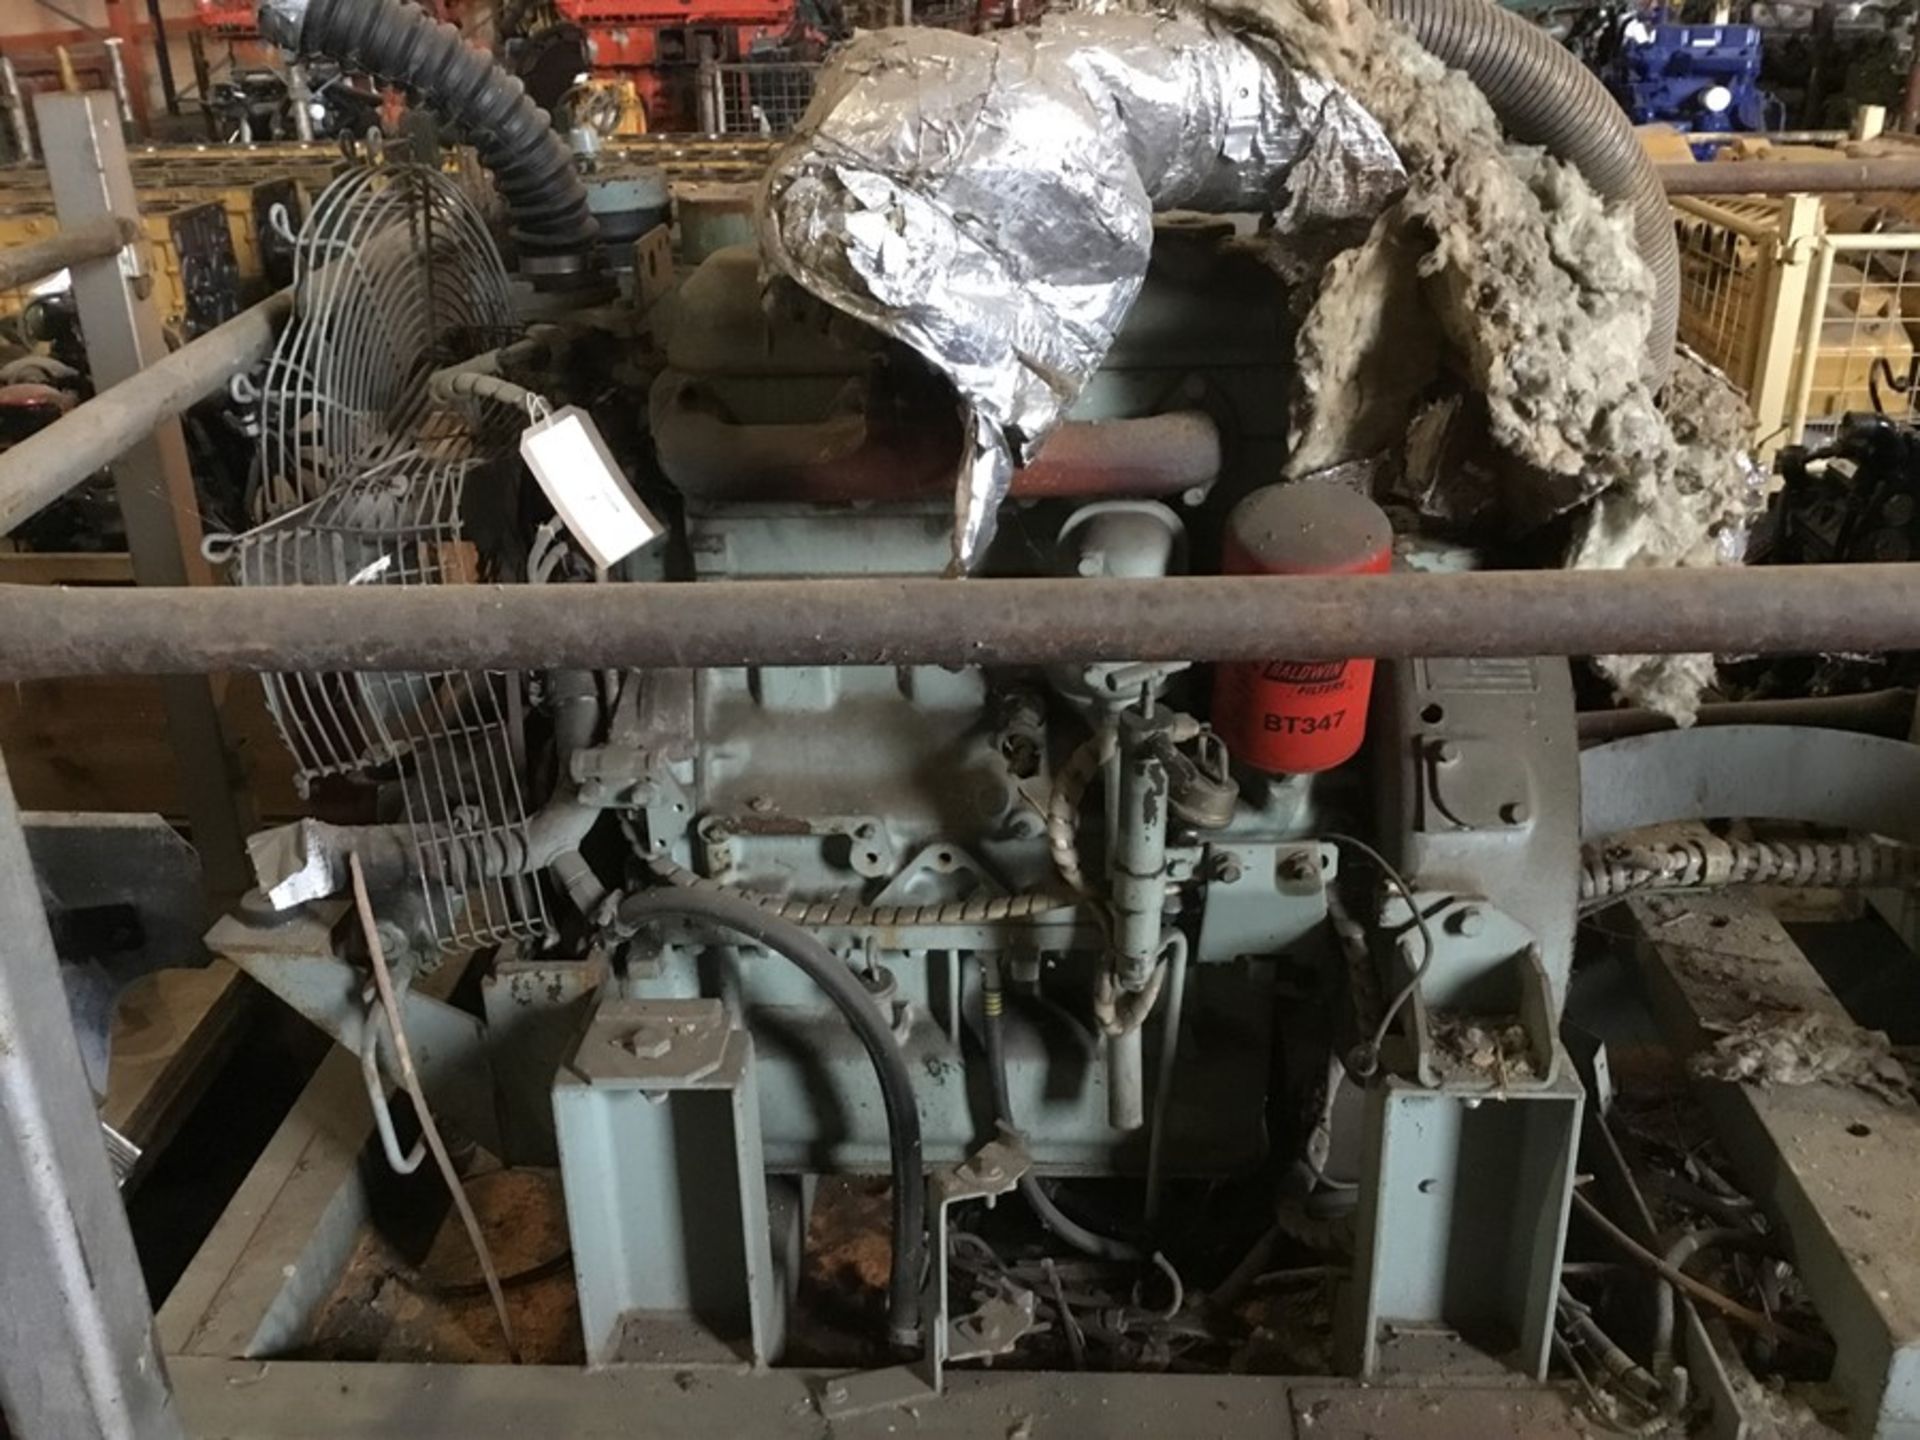 Iveco 8041 Diesel engine: Iveco 8041.04 4cyl non Turbo, Serial 8041.0*306-747516 Incomplete - Image 2 of 15